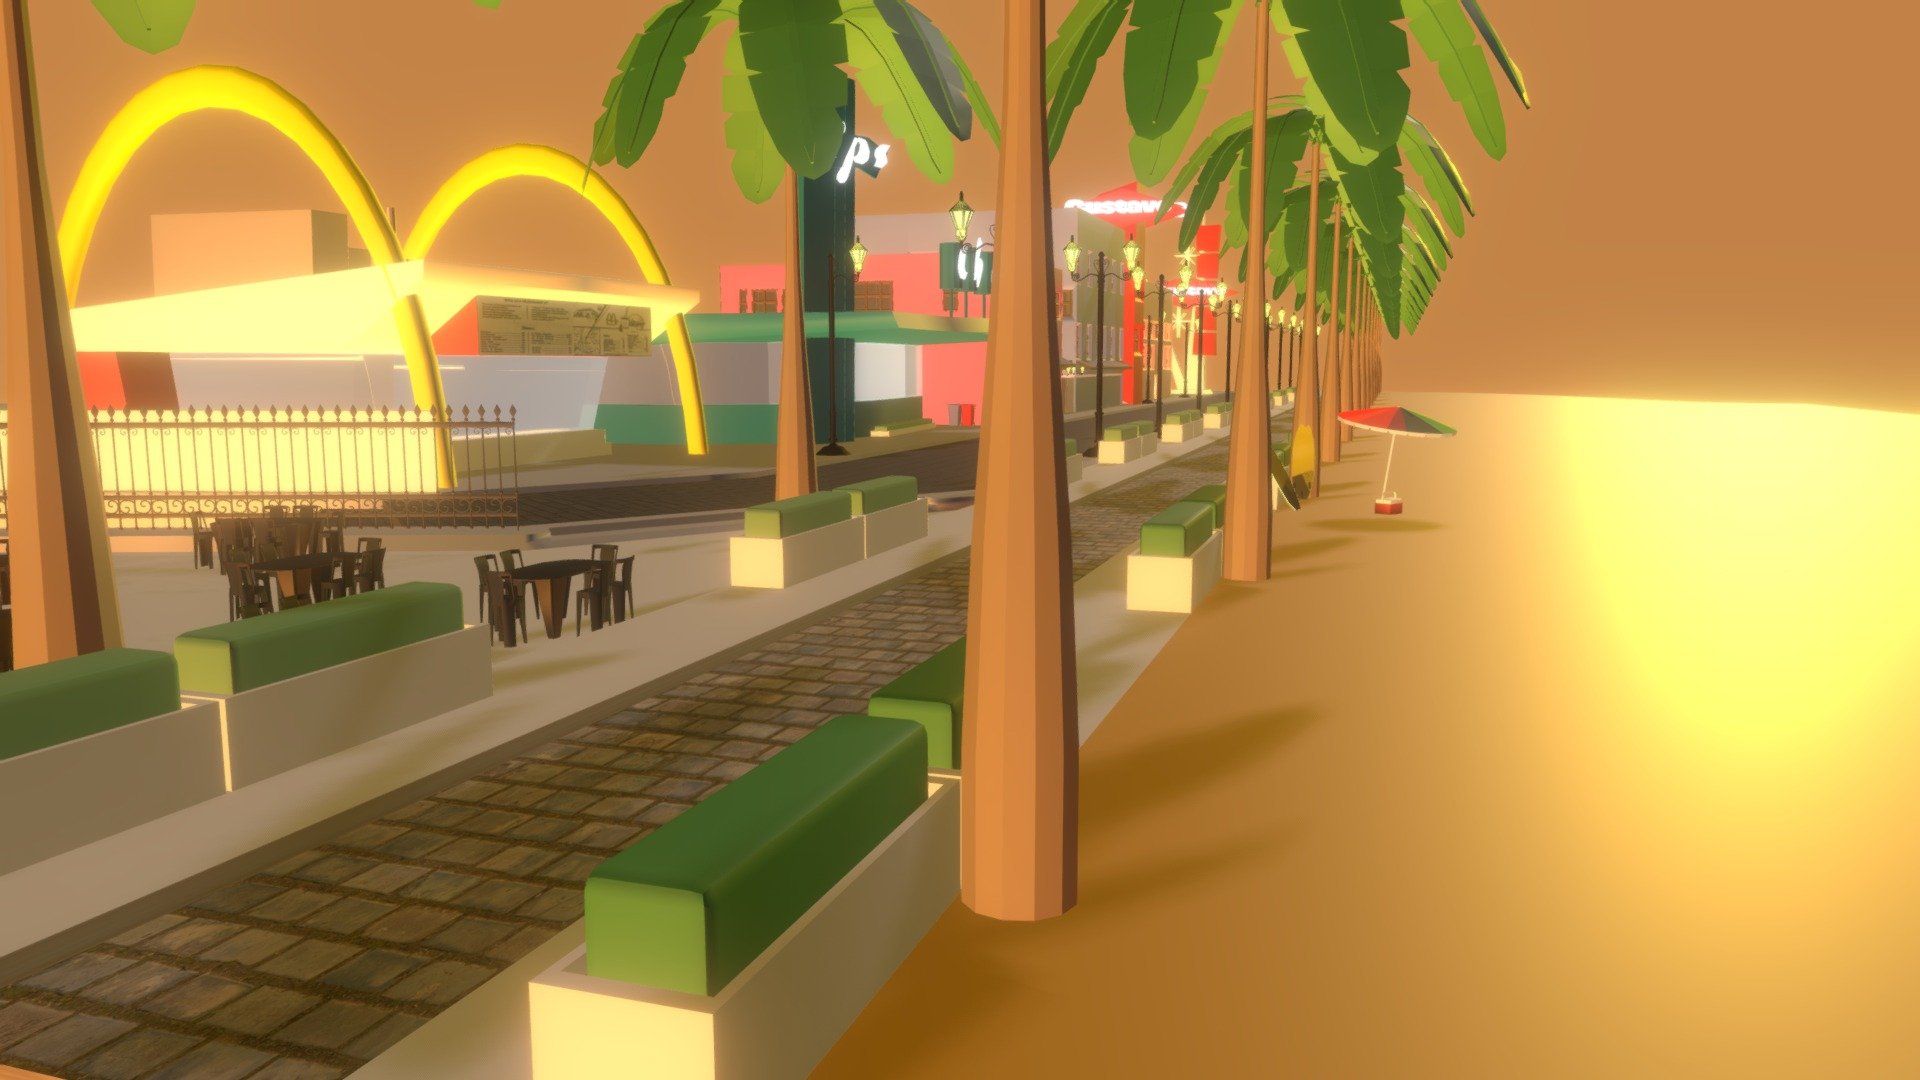 I wanted to go for simple yet stylistic depiction of Venice Beach with a unique architectural style known as Googie, which is characterized by its futuristic design elements. The environment features several establishments, including a McDonald's restaurant with its iconic golden arches, a restaurant called &ldquo;Chips,